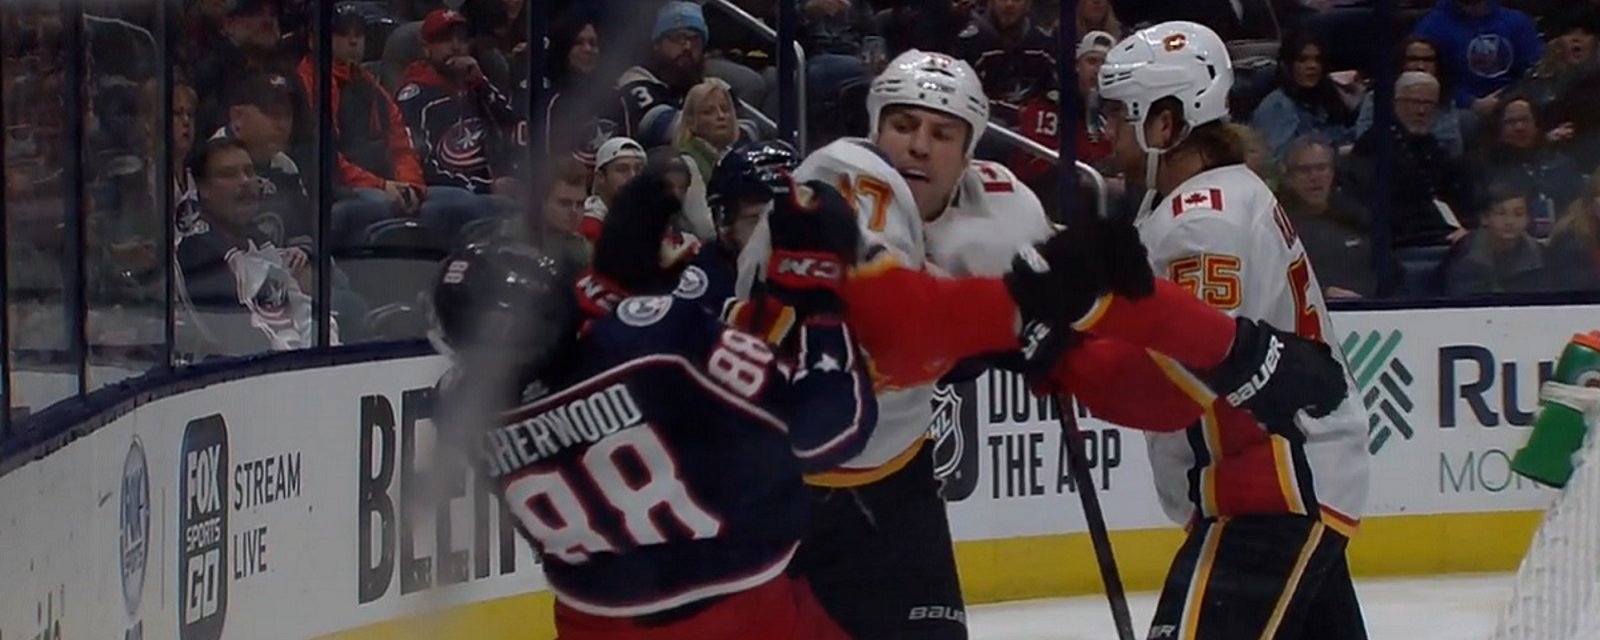 Milan Lucic suspended for sucker punch to the head of Kole Sherwood.